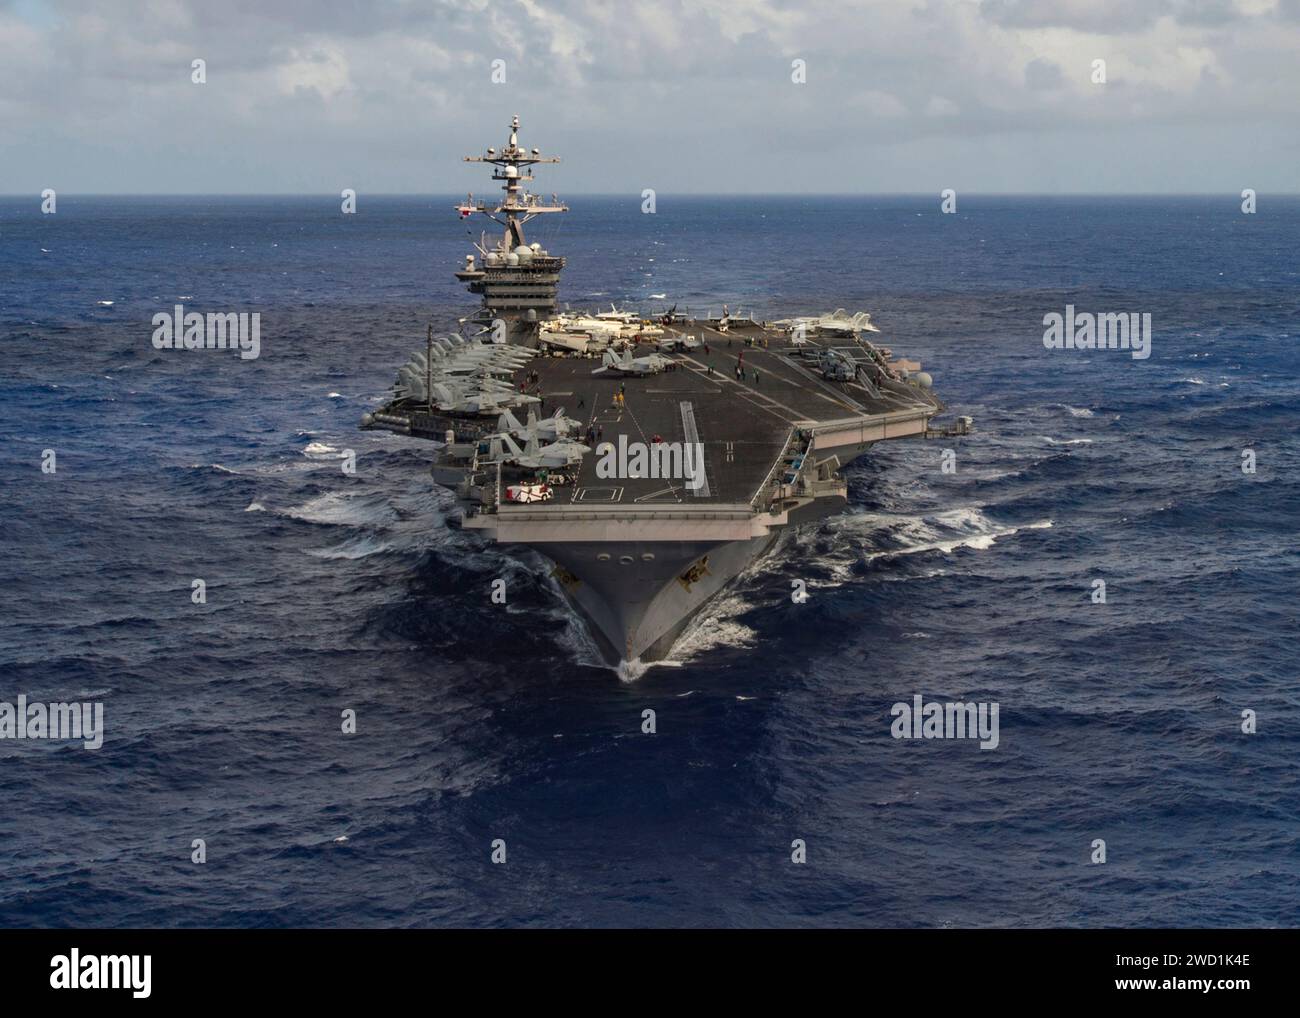 The aircraft carrier USS Carl Vinson transits the Pacific Ocean. Stock Photo